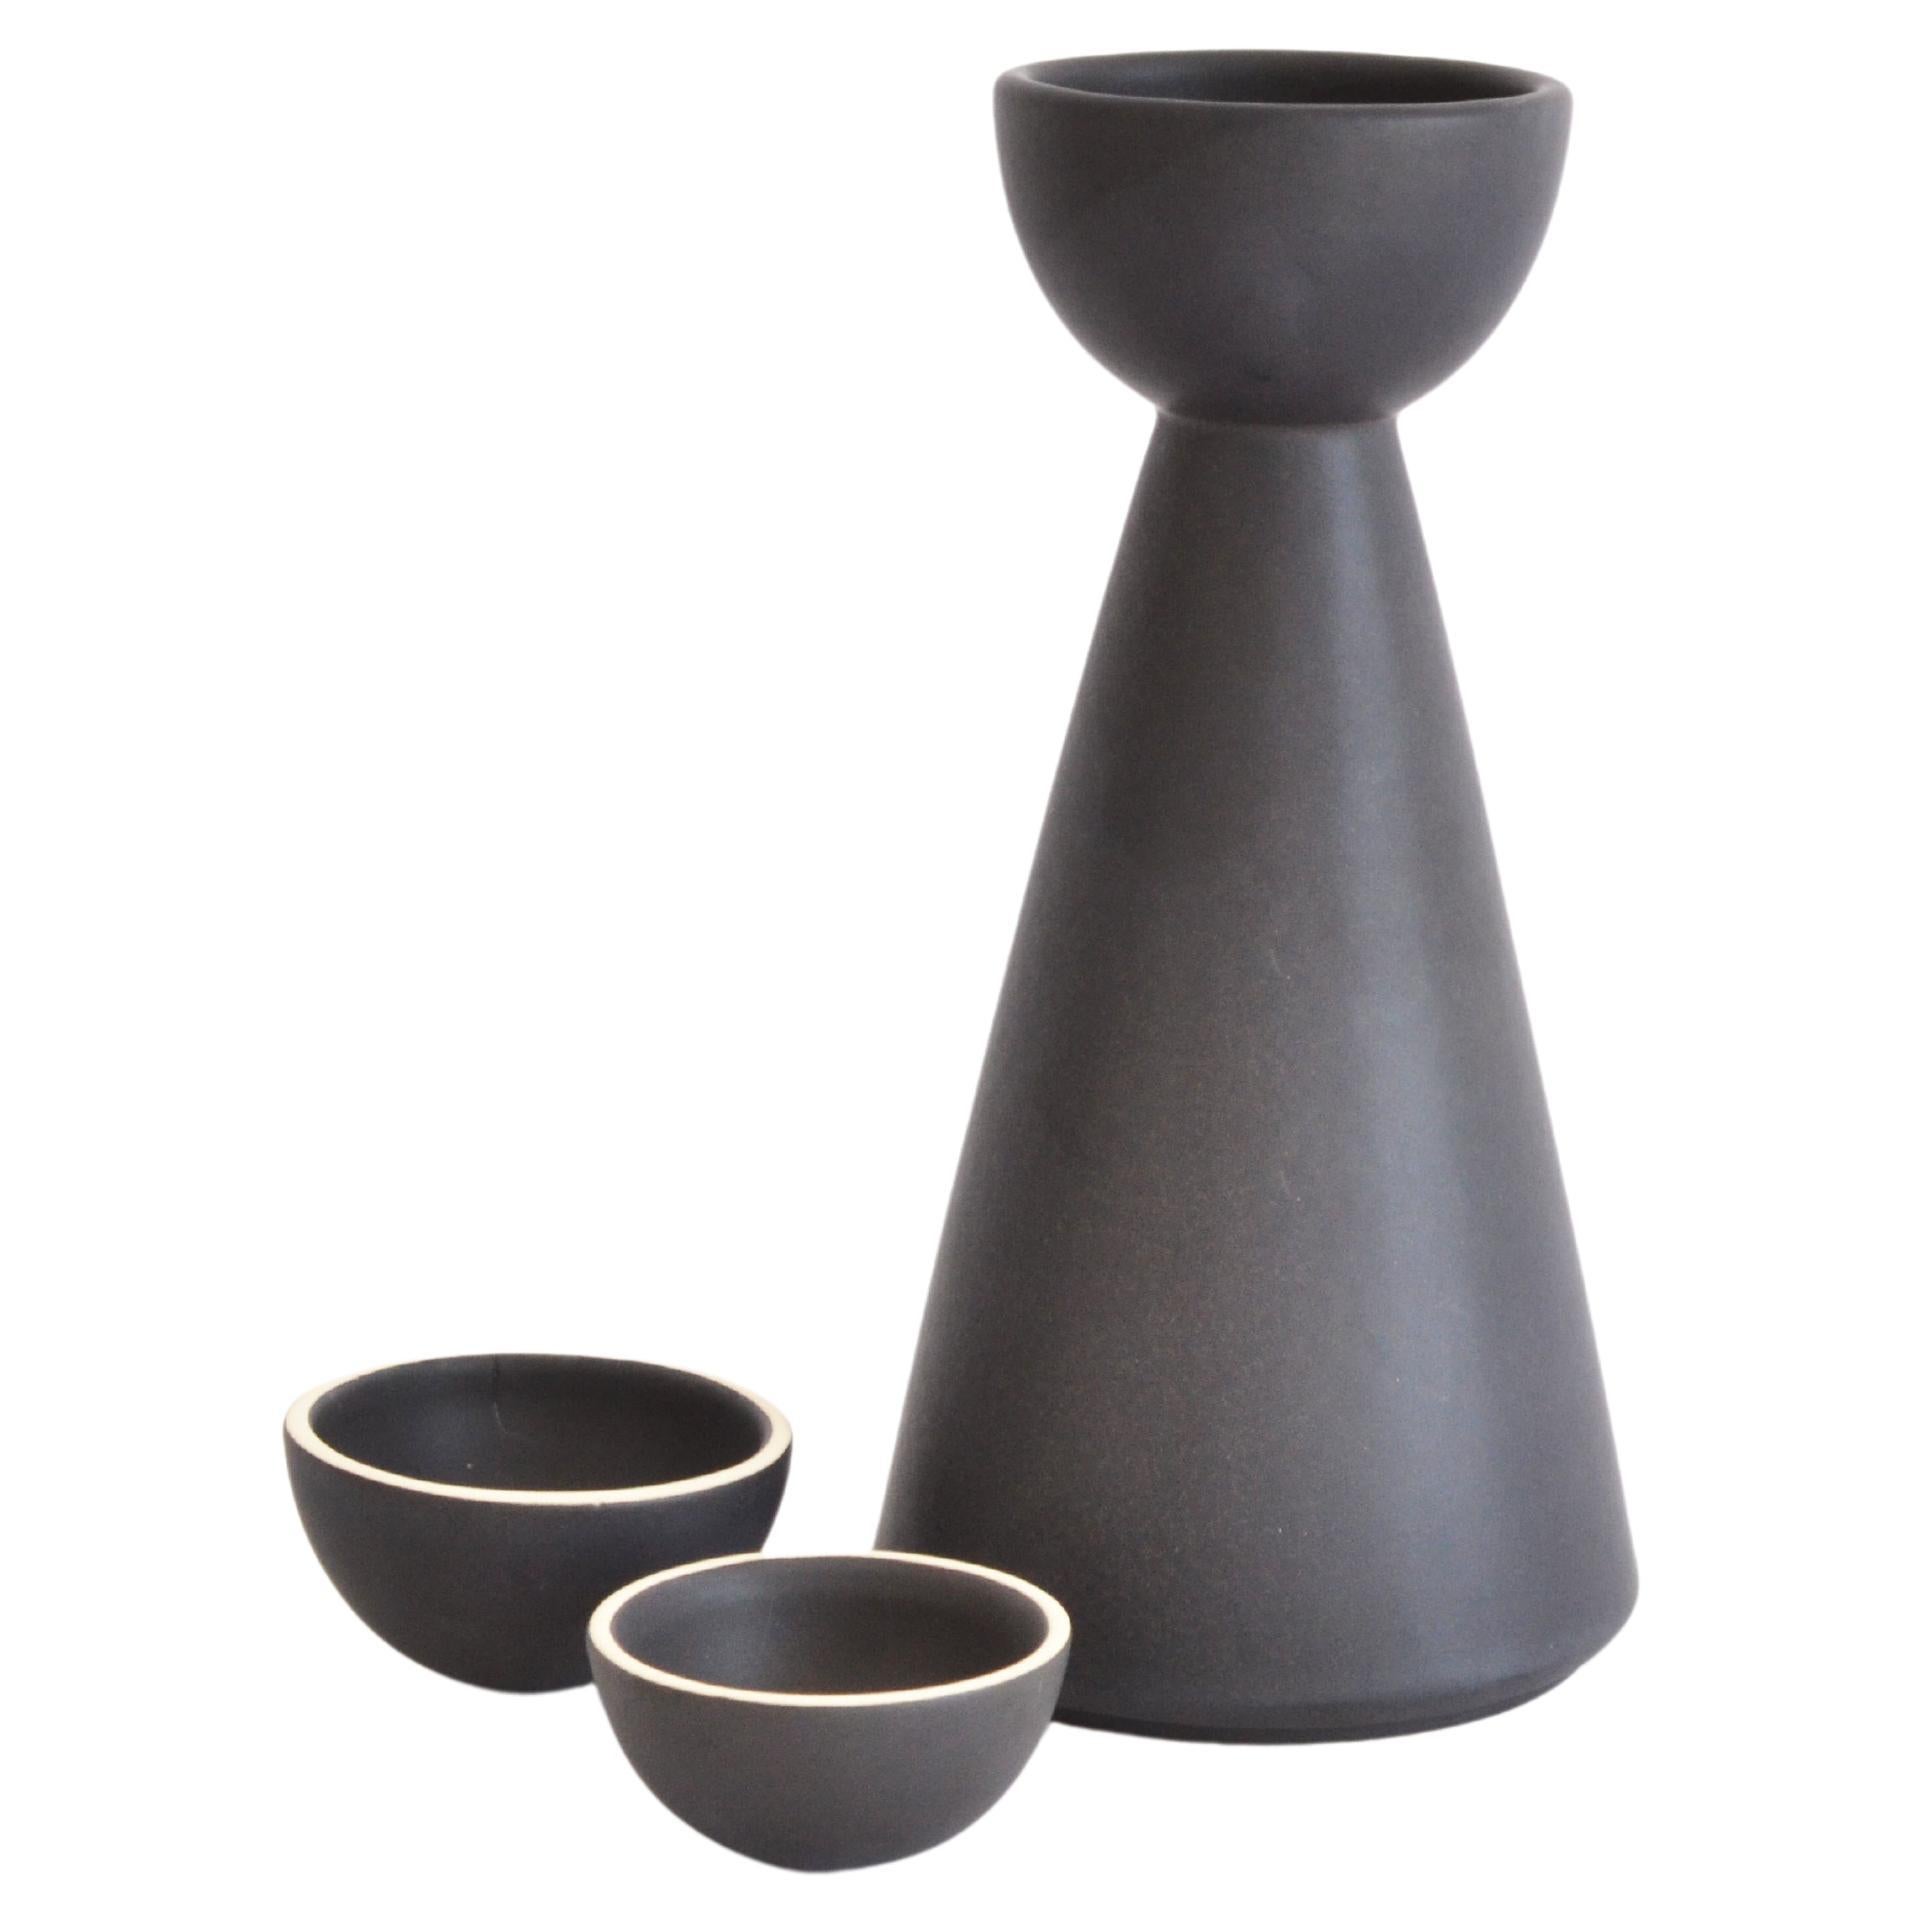 BLACK Carafe Contemporary Inspired by Traditional Jug Pitcher for Mezcal For Sale